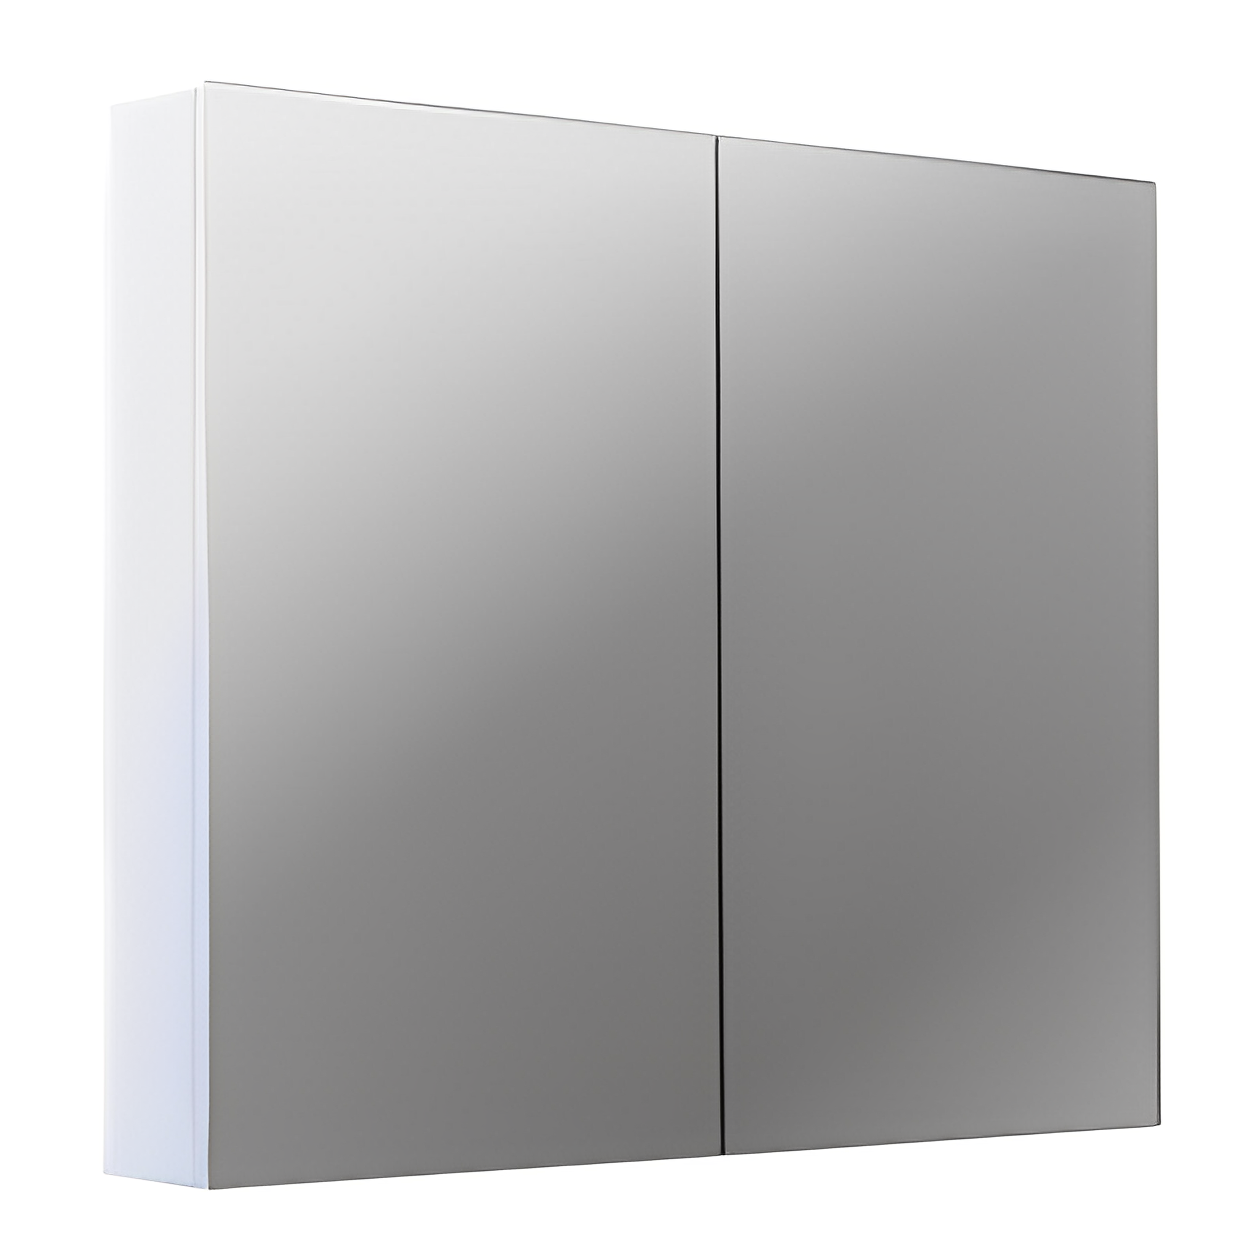 POSEIDON MPSV MIRROR CABINET (AVAILABLE IN 600MM, 750MM AND 900MM)